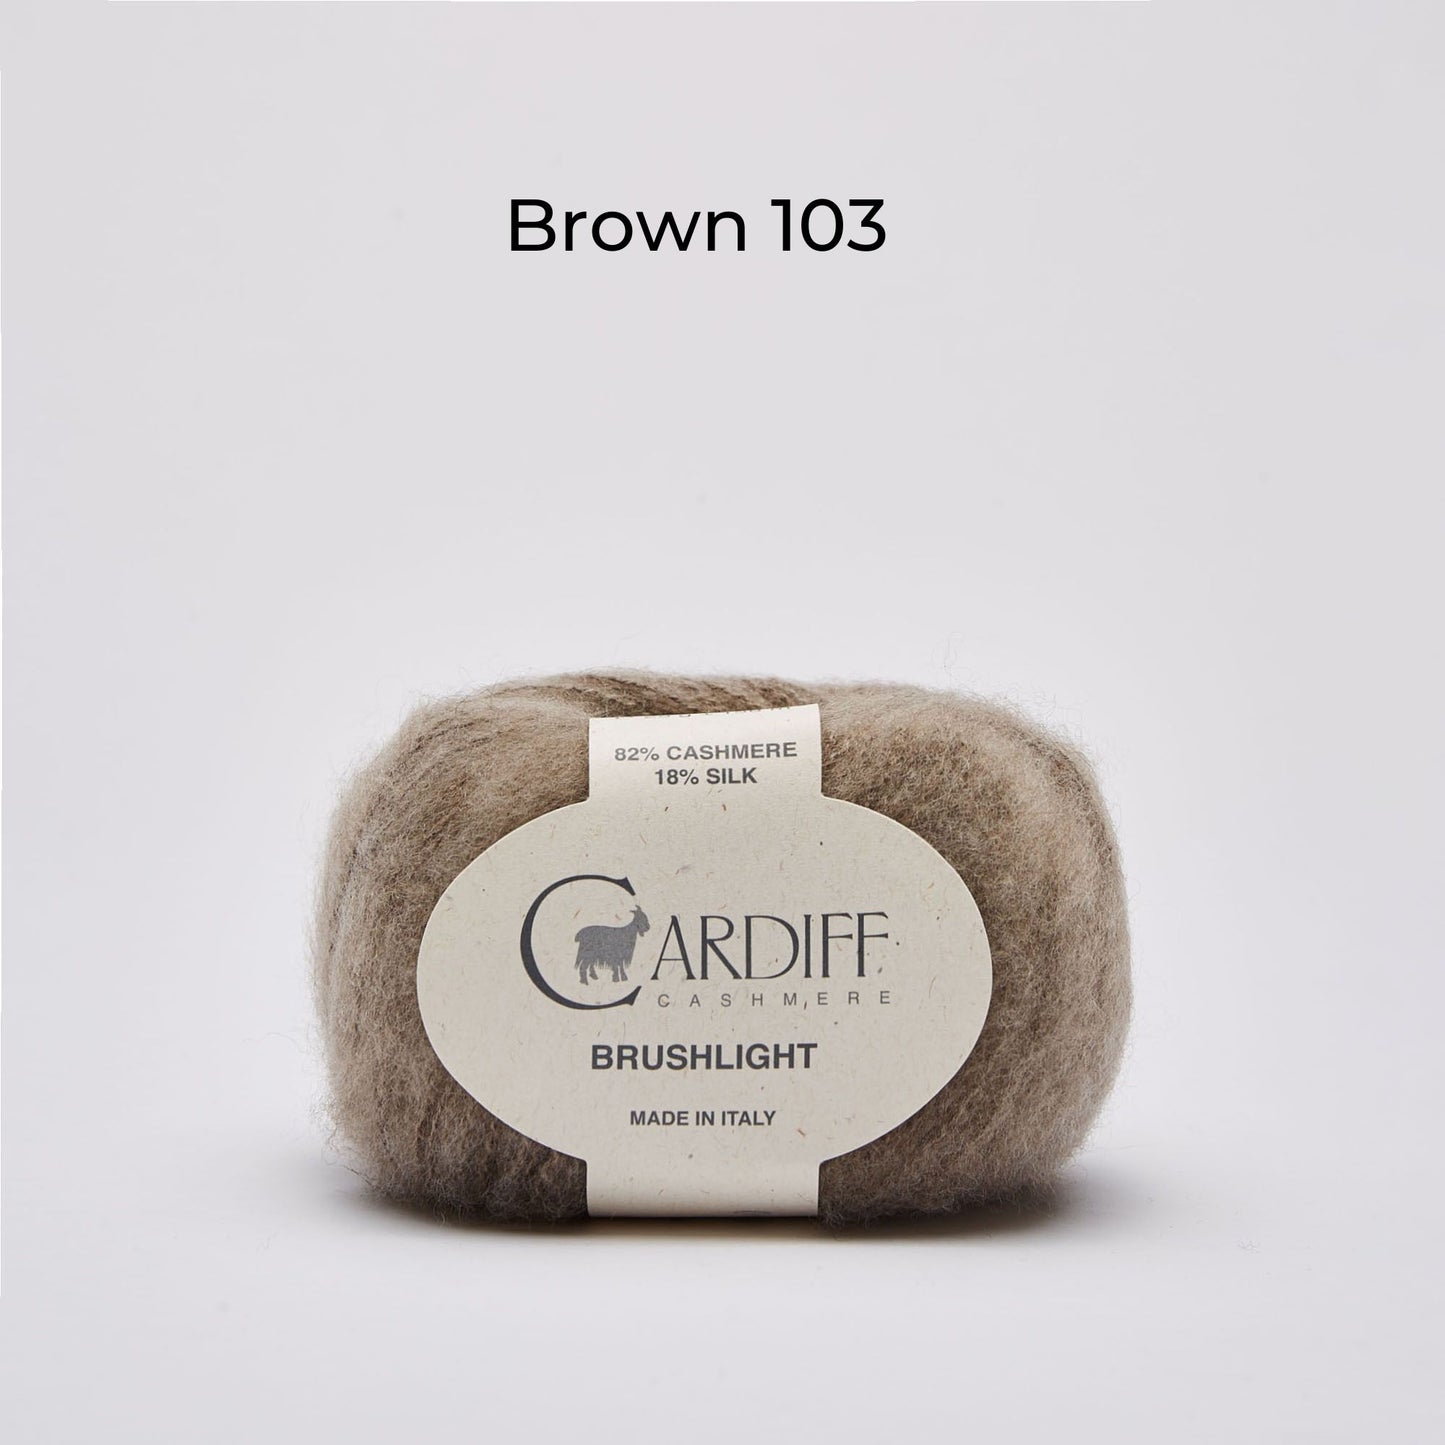 Cashmere wool - Cardiff Cashmere Brushlight - NS 3.5-4mm